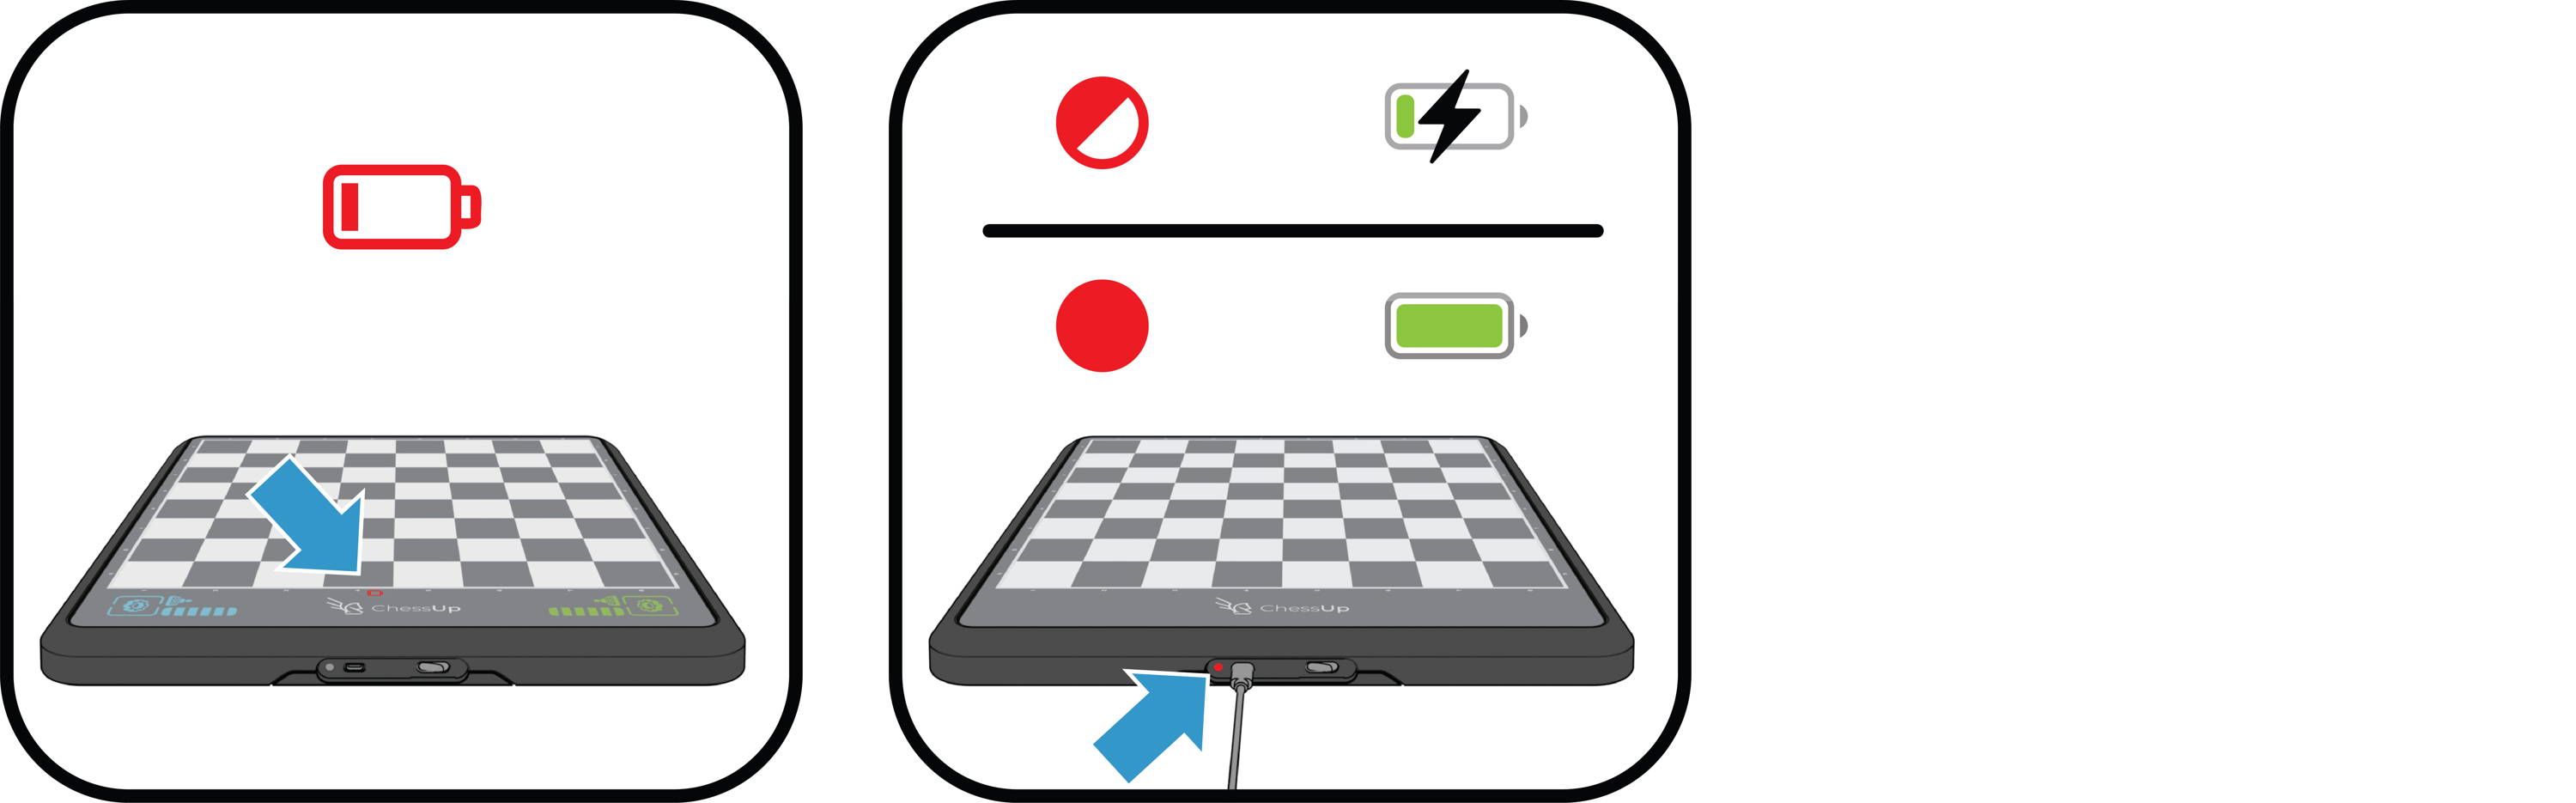 How to Setup a Game - App - ChessUp Knowledge Base